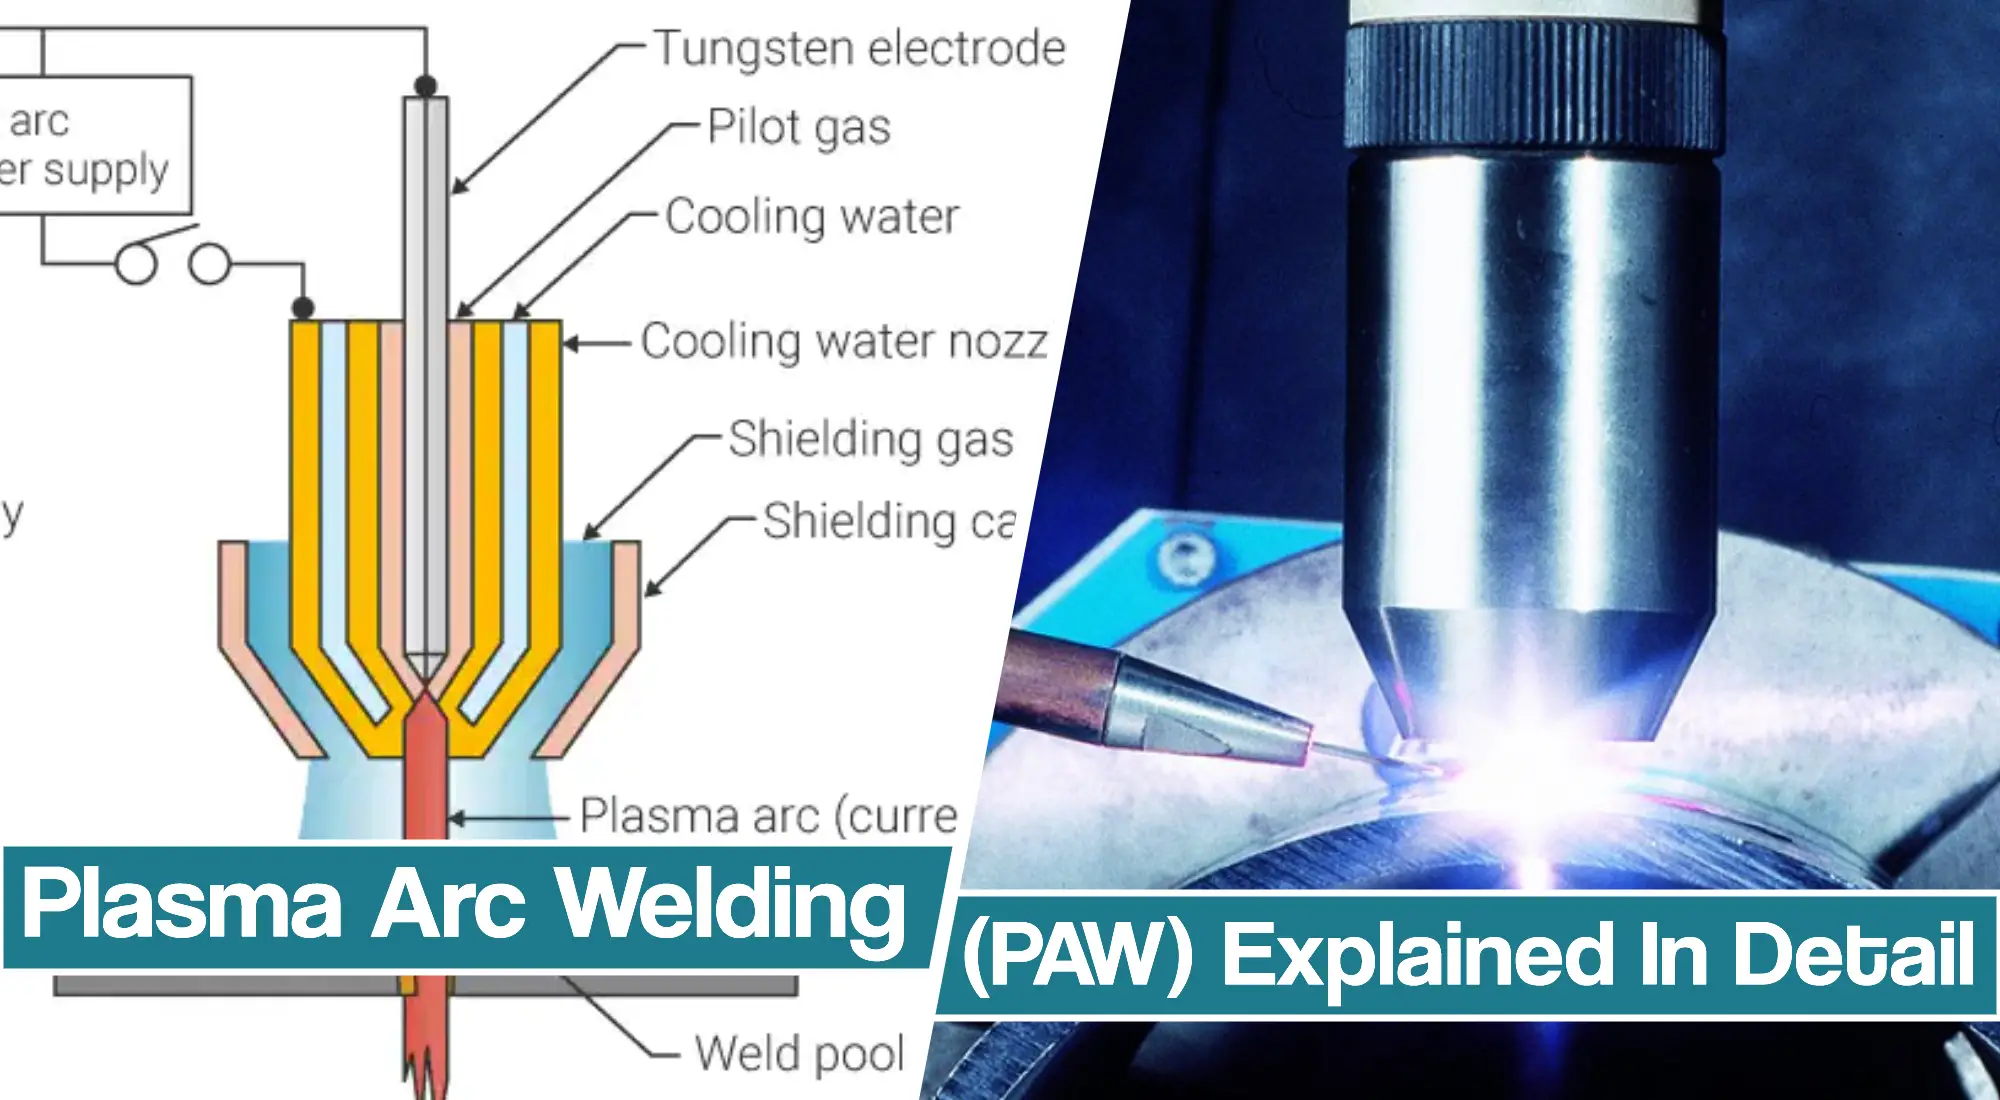 Plasma Arc welding – Benefits, How it Works And PAW Equipment